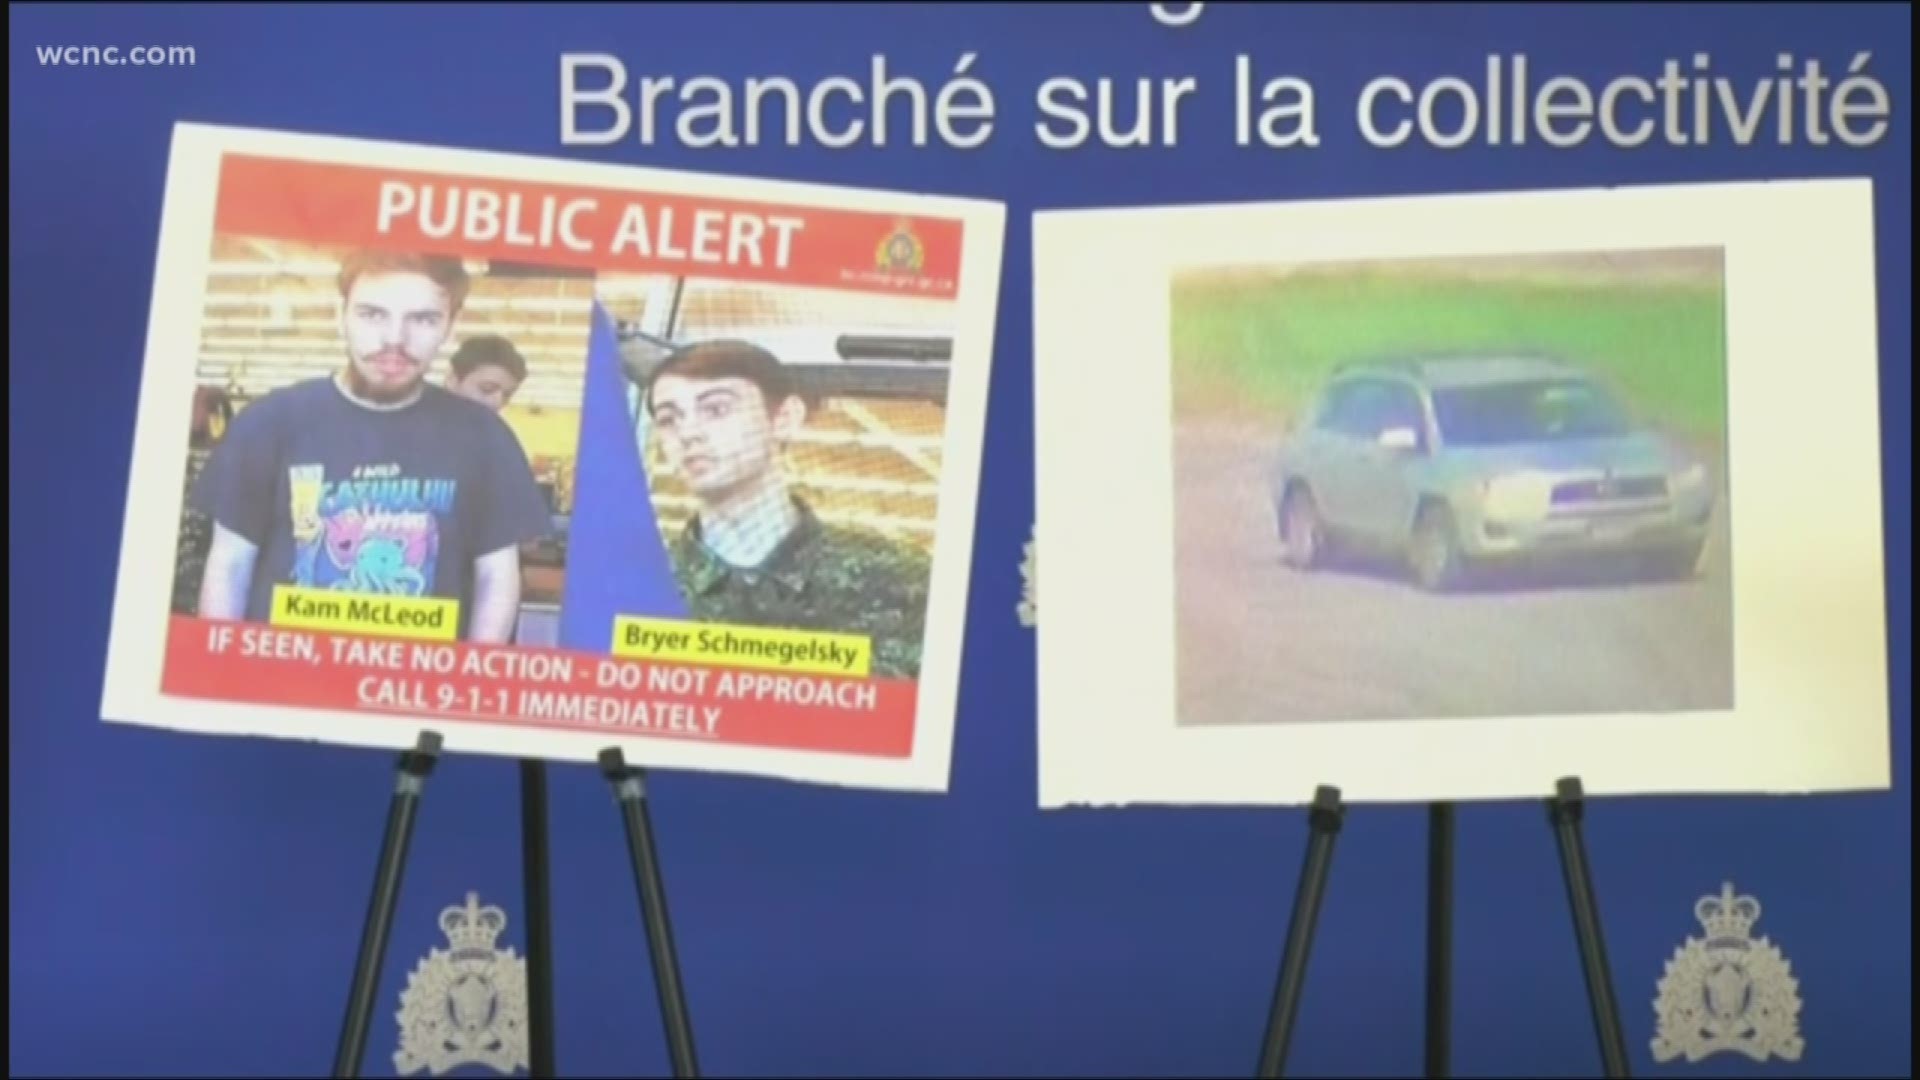 Kam McLeod and Bryer Schmegelsky are believed to have left British Columbia and were spotted in northern Saskatchewan.